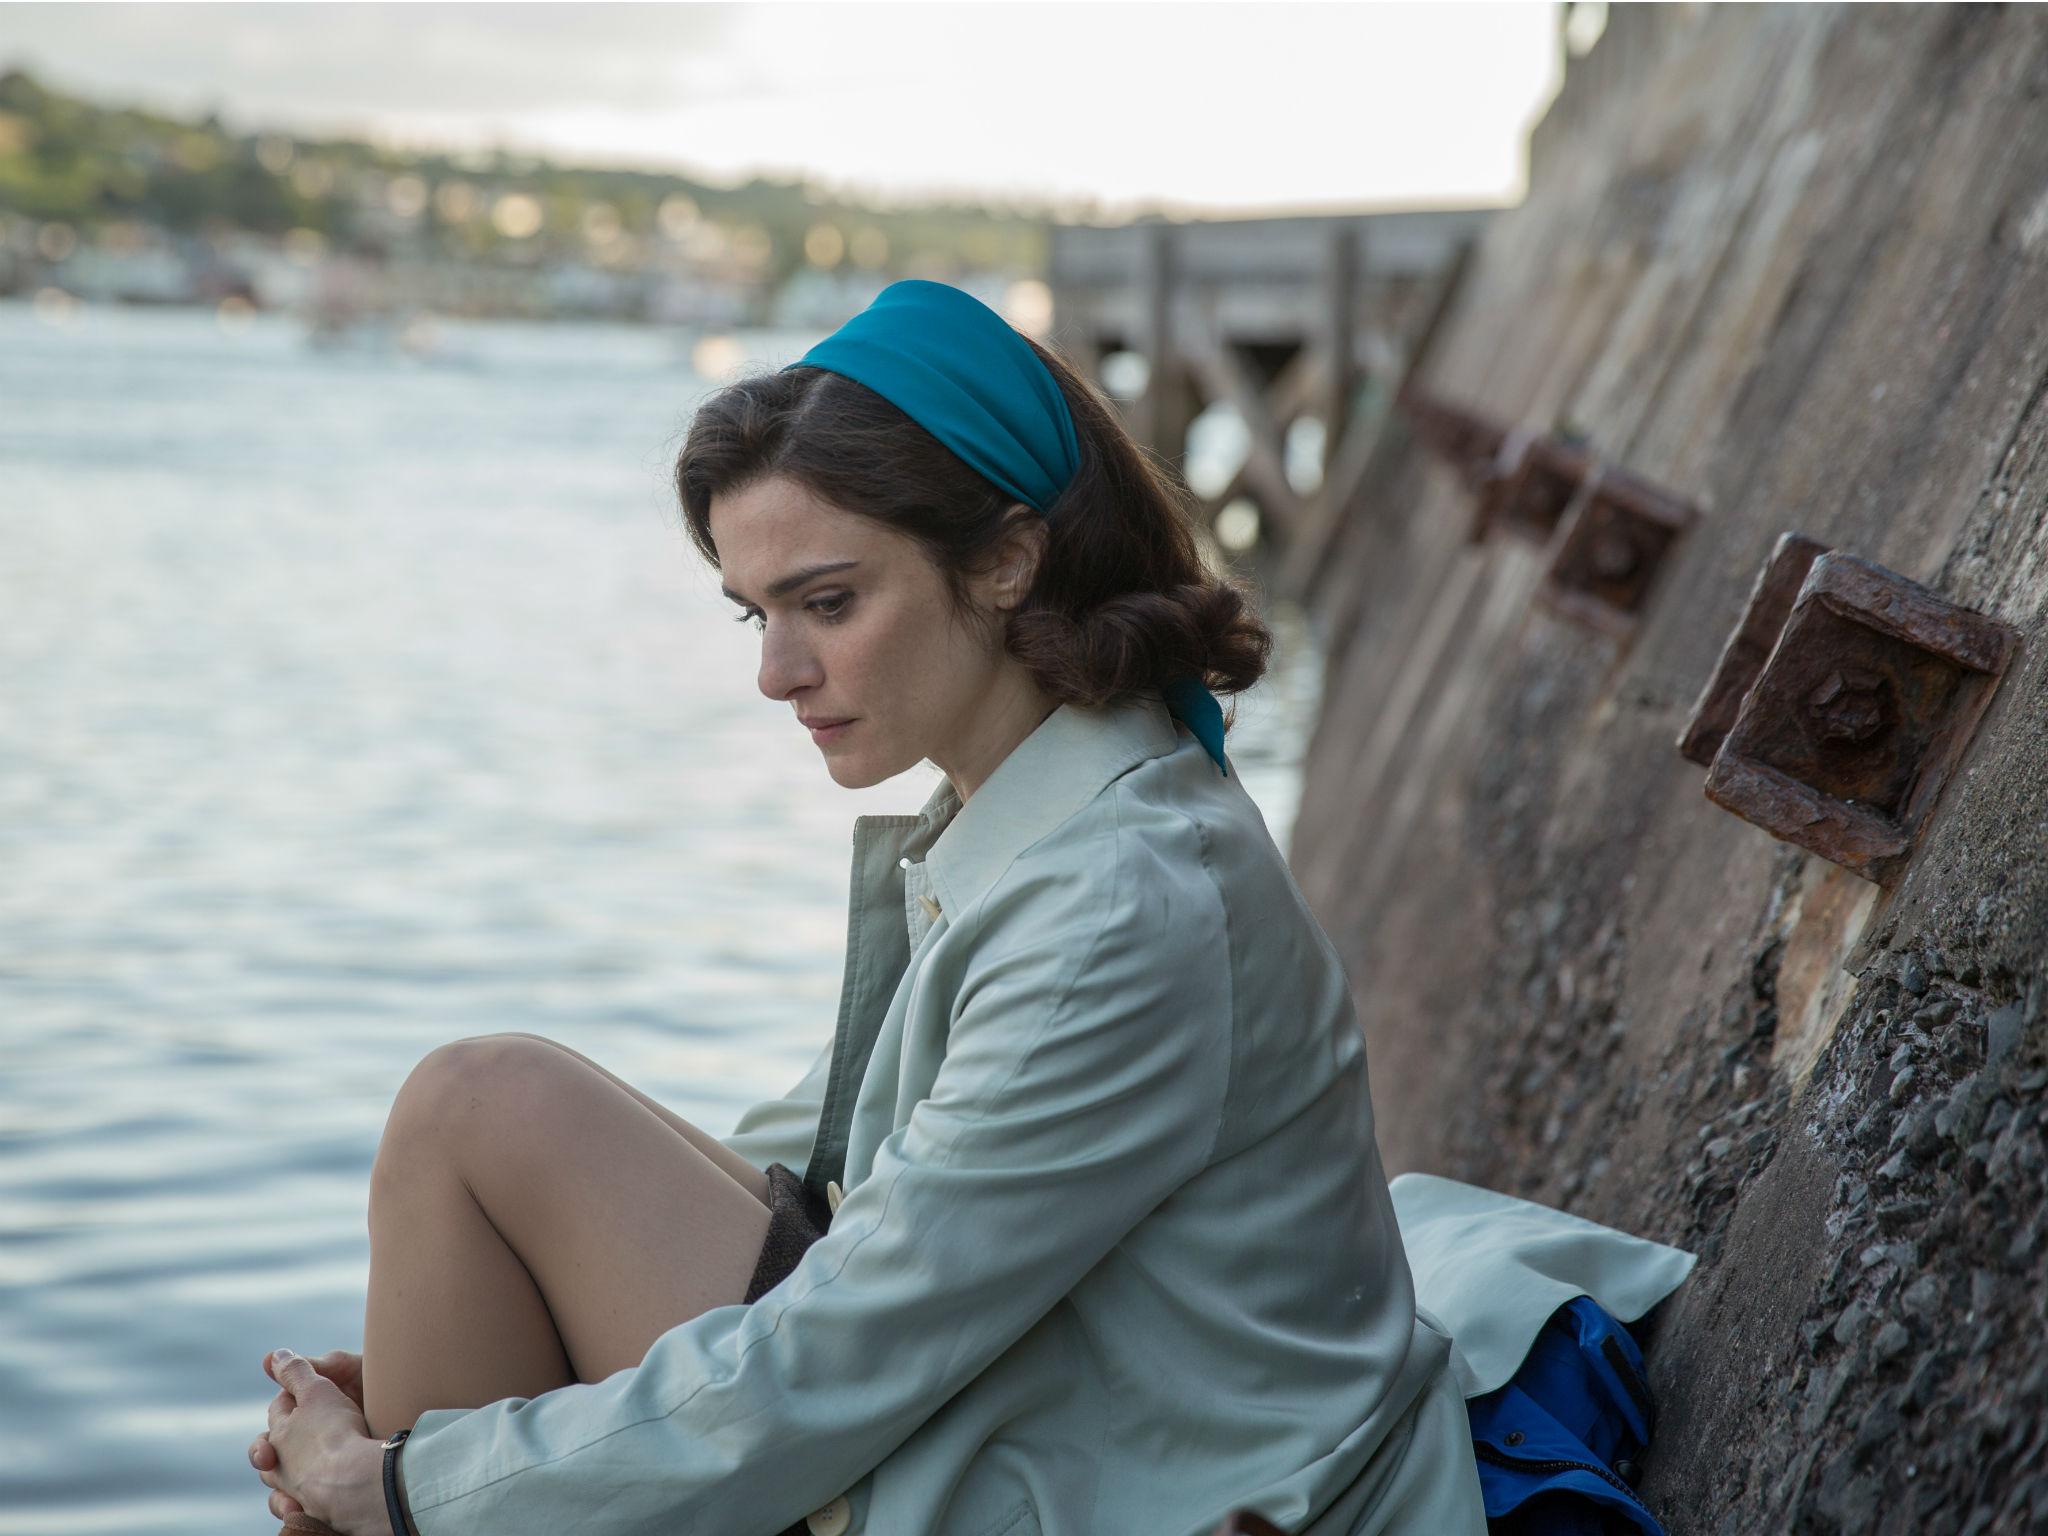 Rachel Weisz as Clare in 'The Mercy' whose husband is the ill-prepared round-the-world yachtsman, Donald Crowhurst, played by Colin Firth